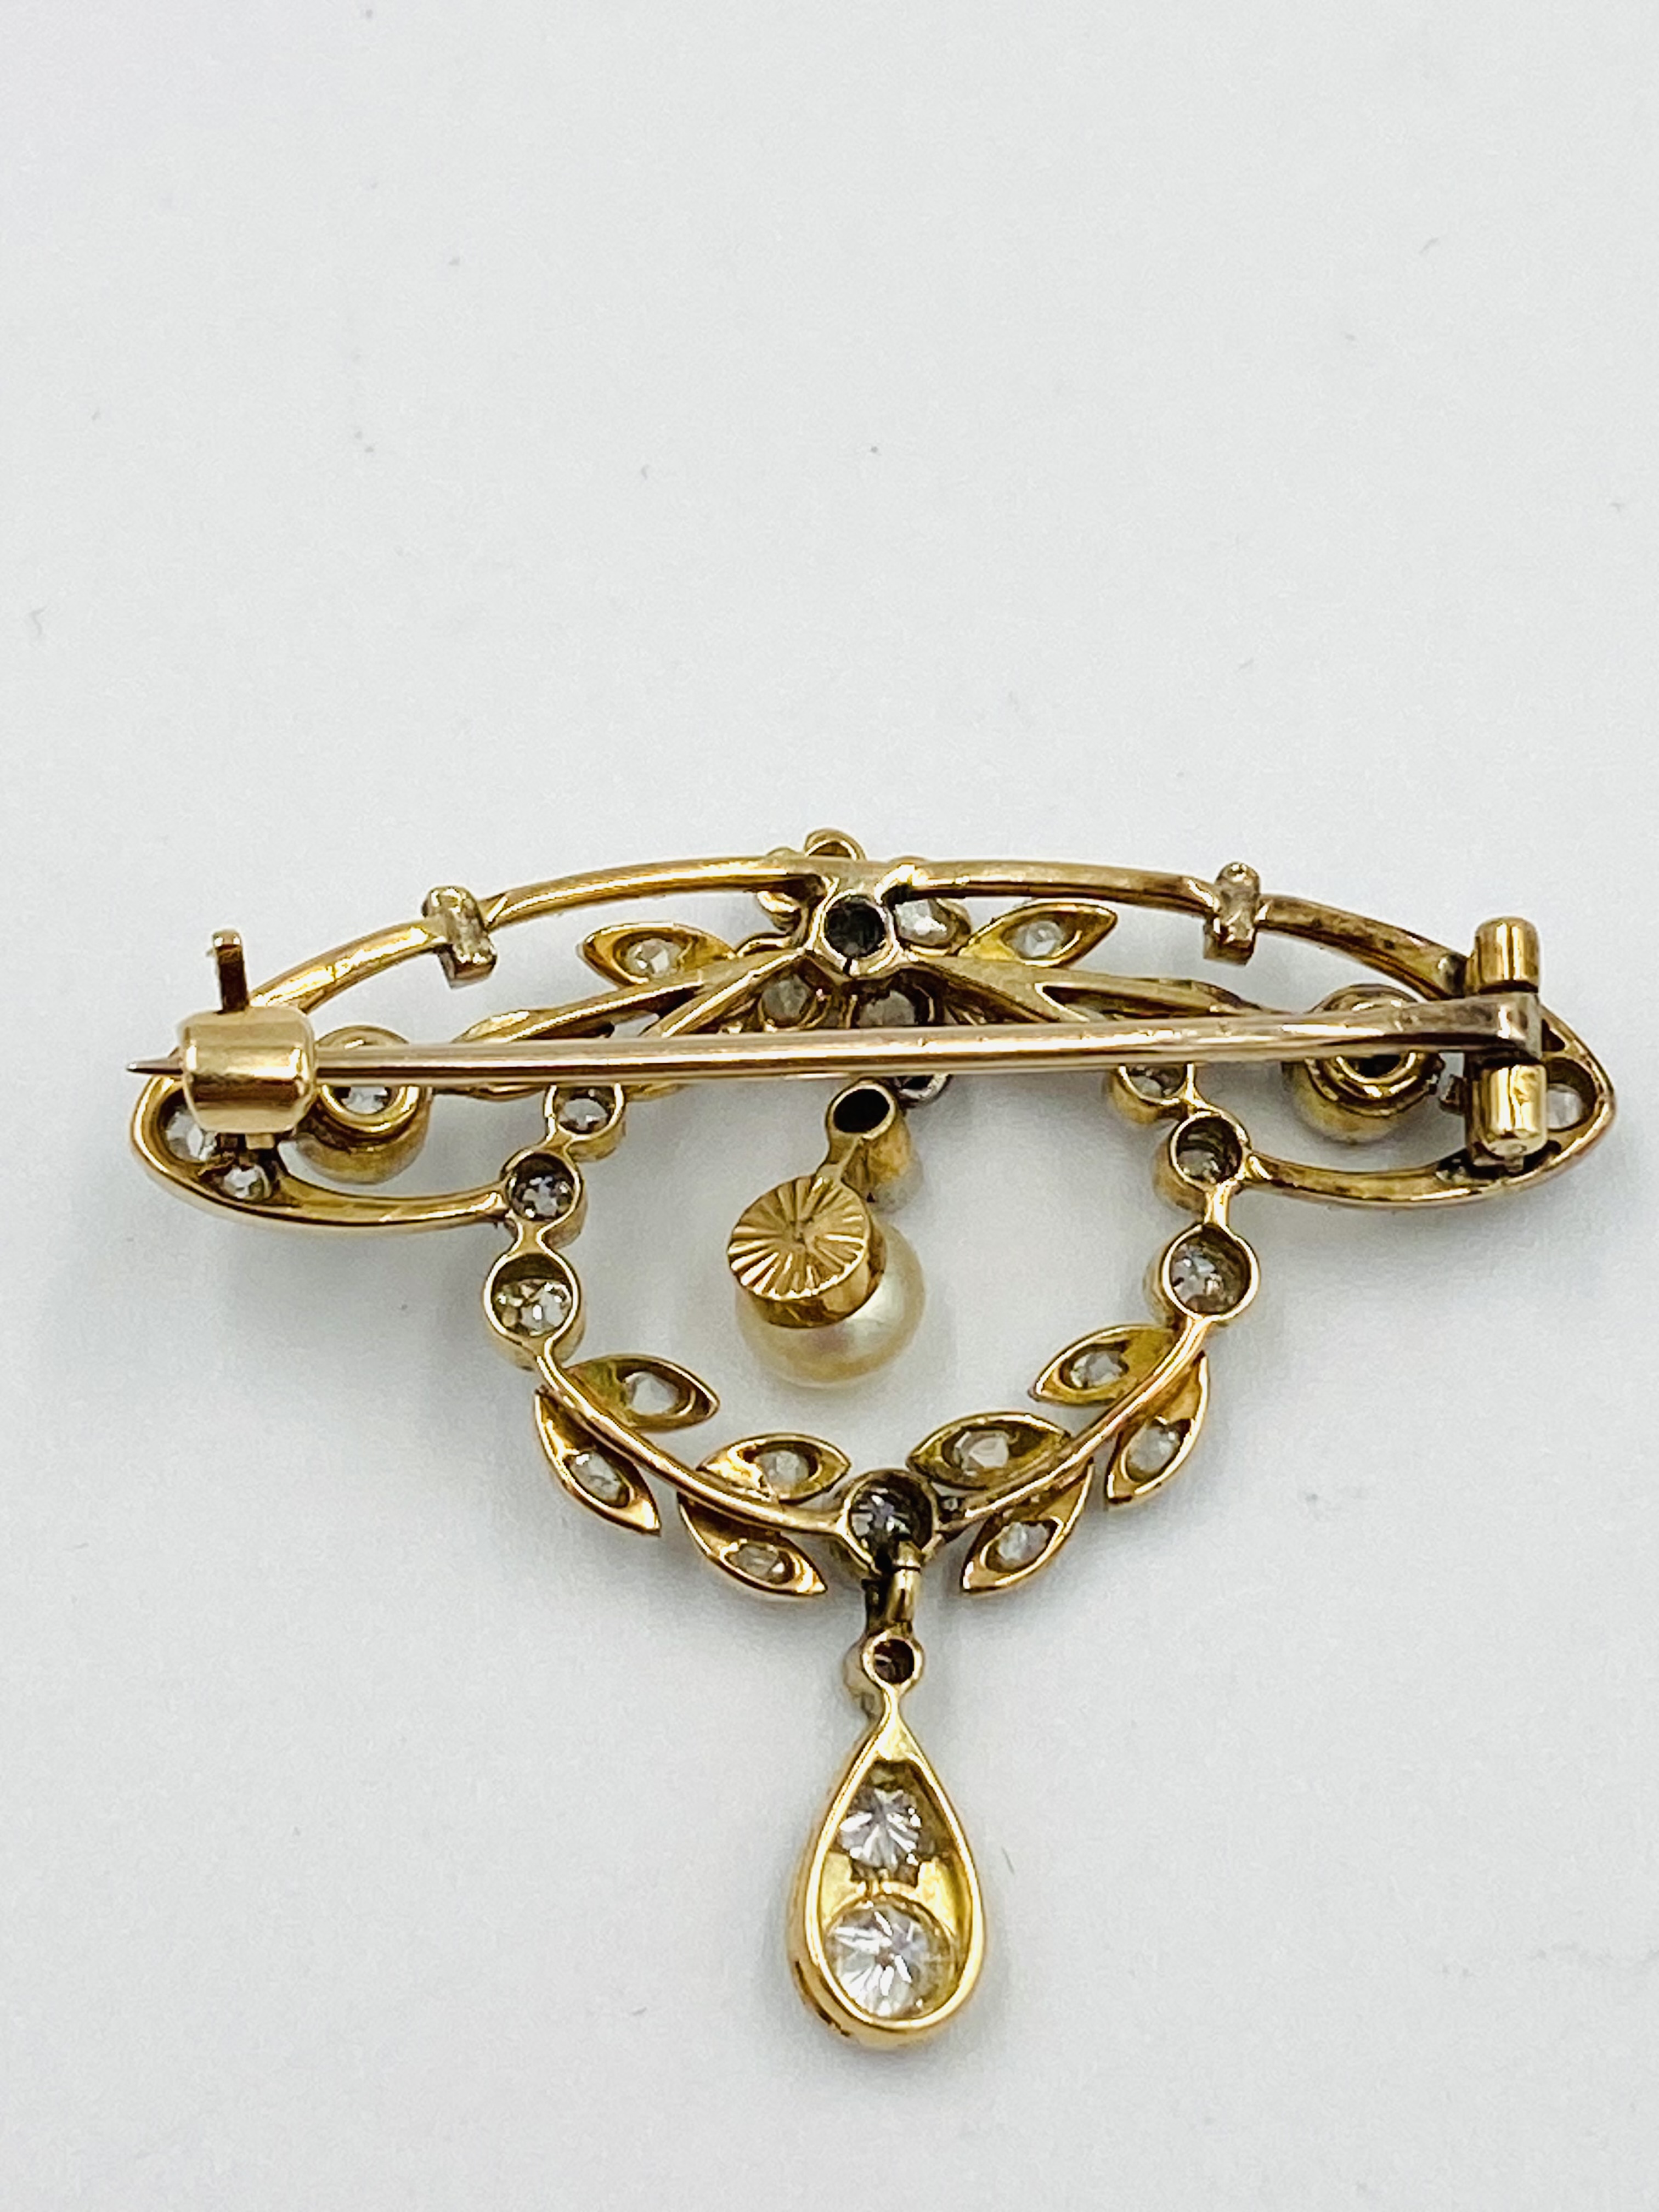 Early 20th century diamond brooch with pearl drop - Image 4 of 4